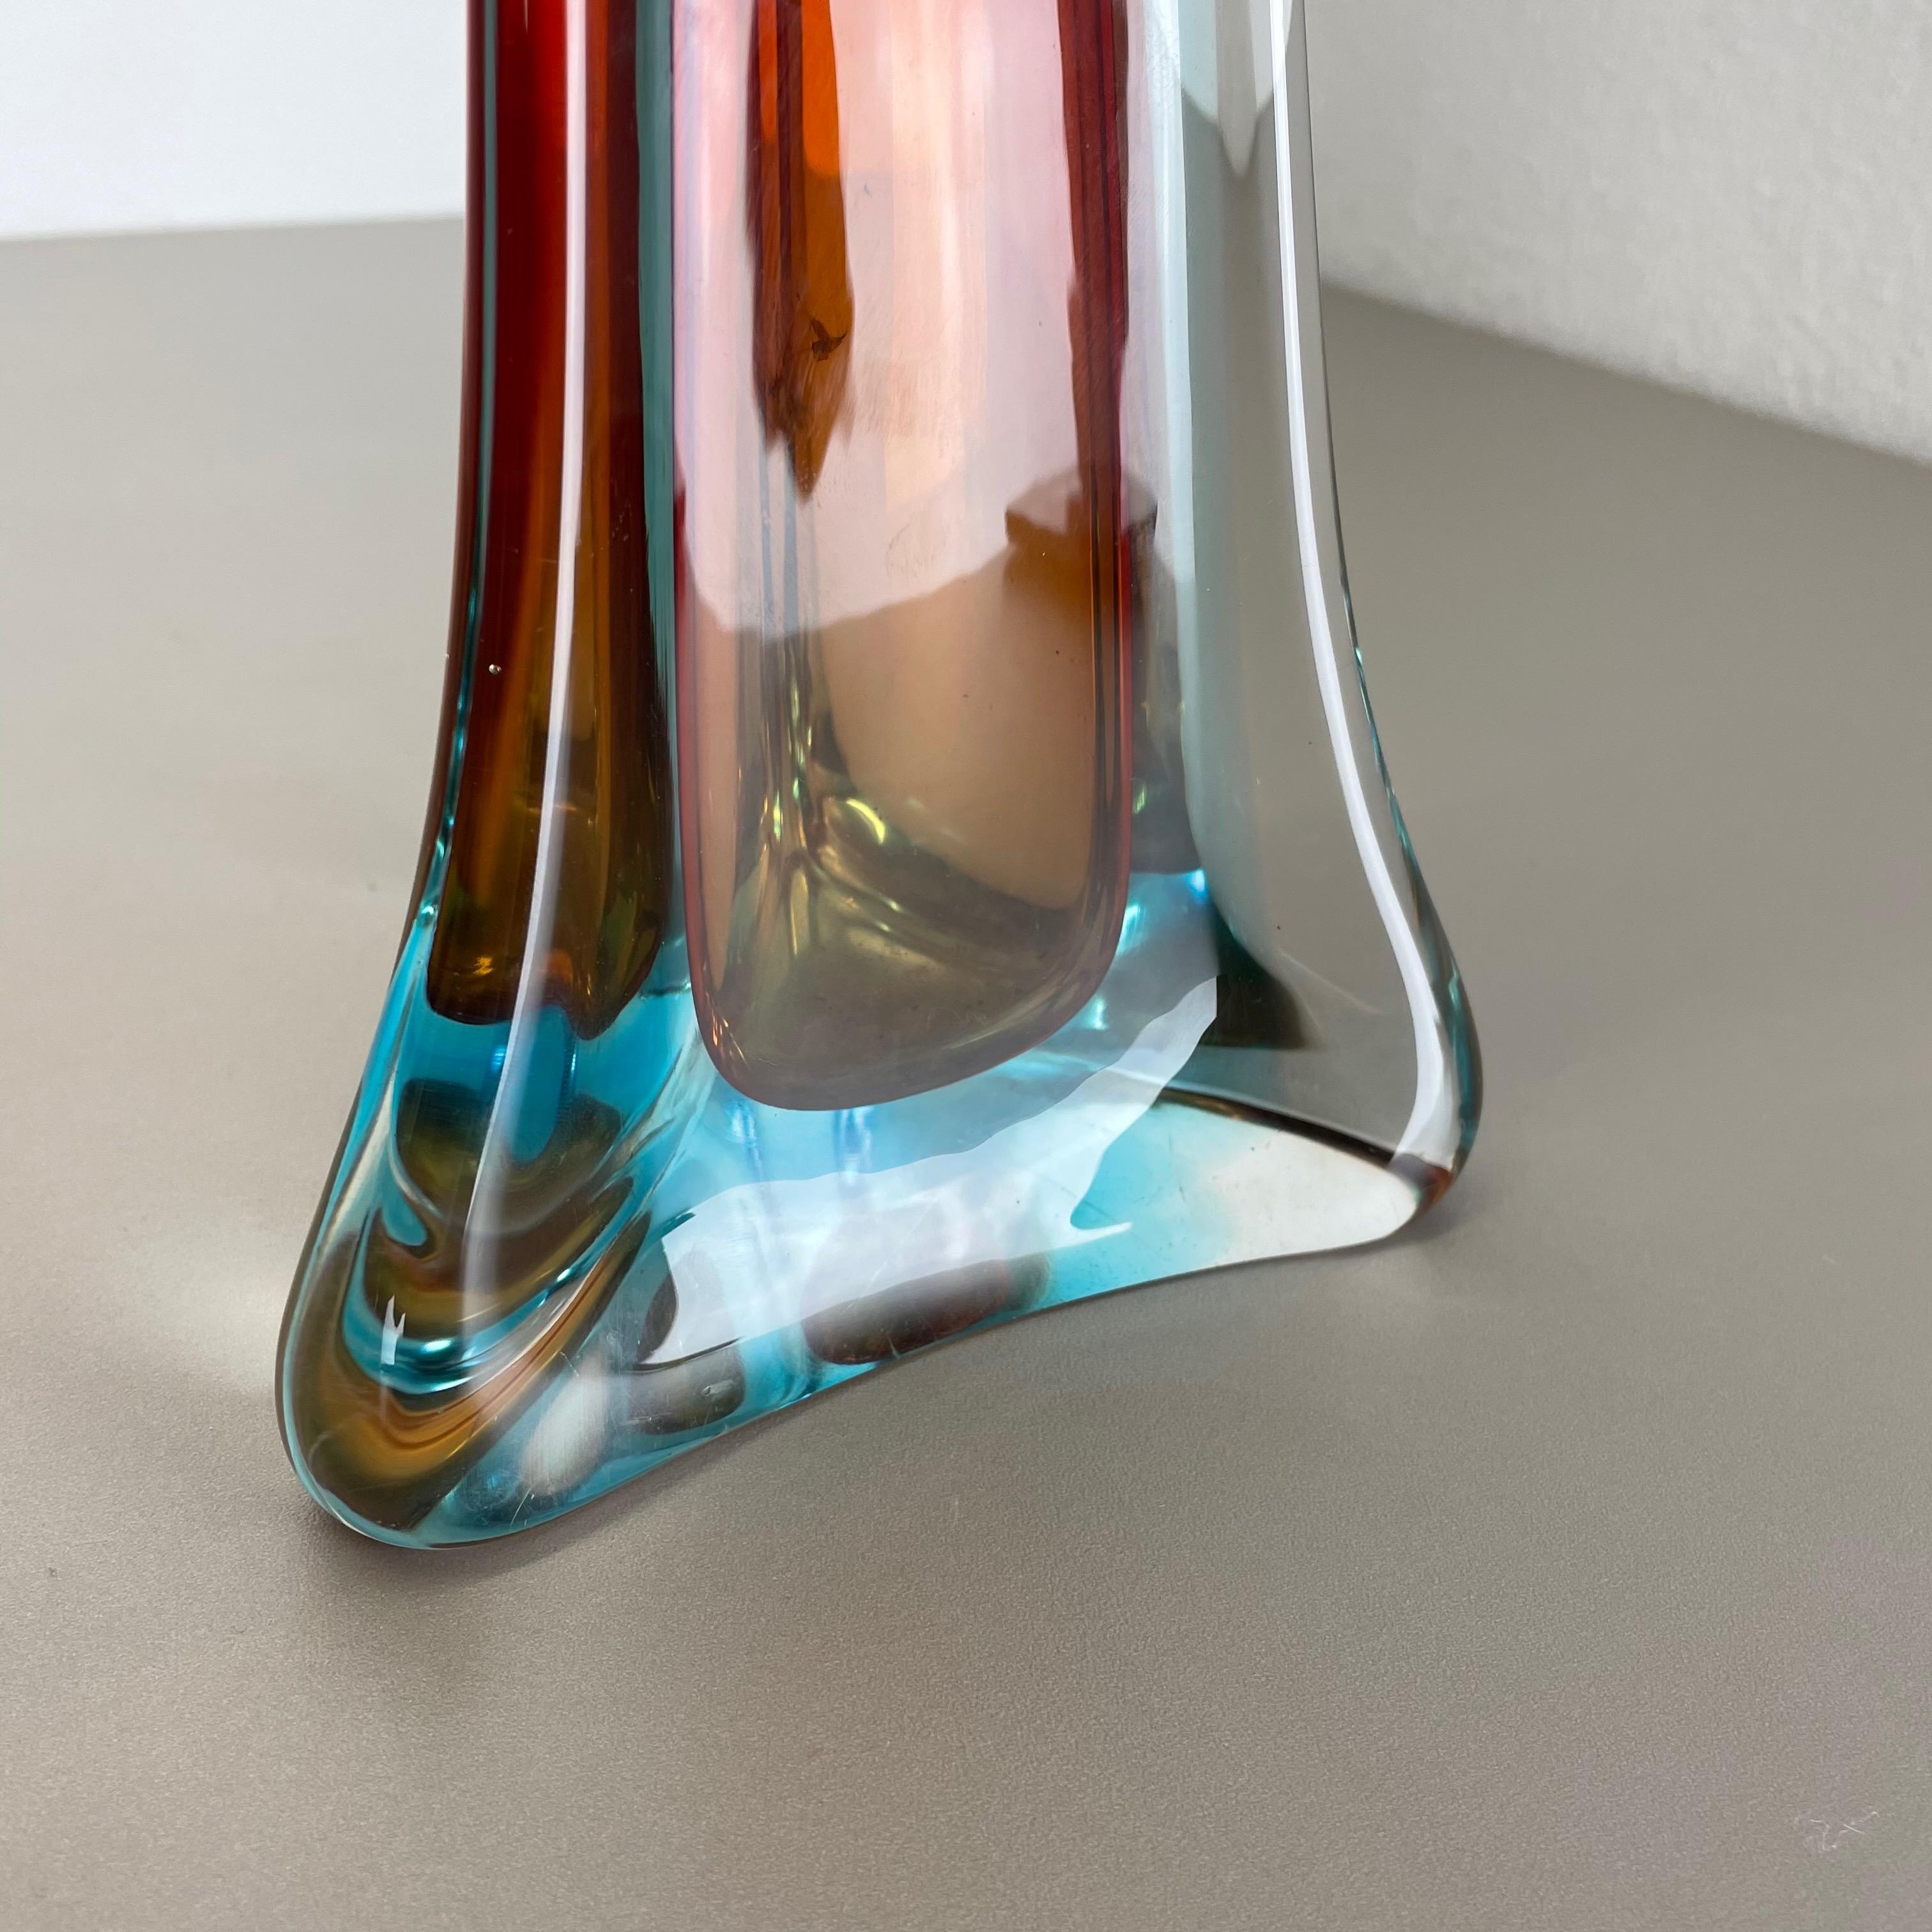 Extra Large Organic Multi-Color Murano Glass Sommerso Vase Italy, 1970s For Sale 5